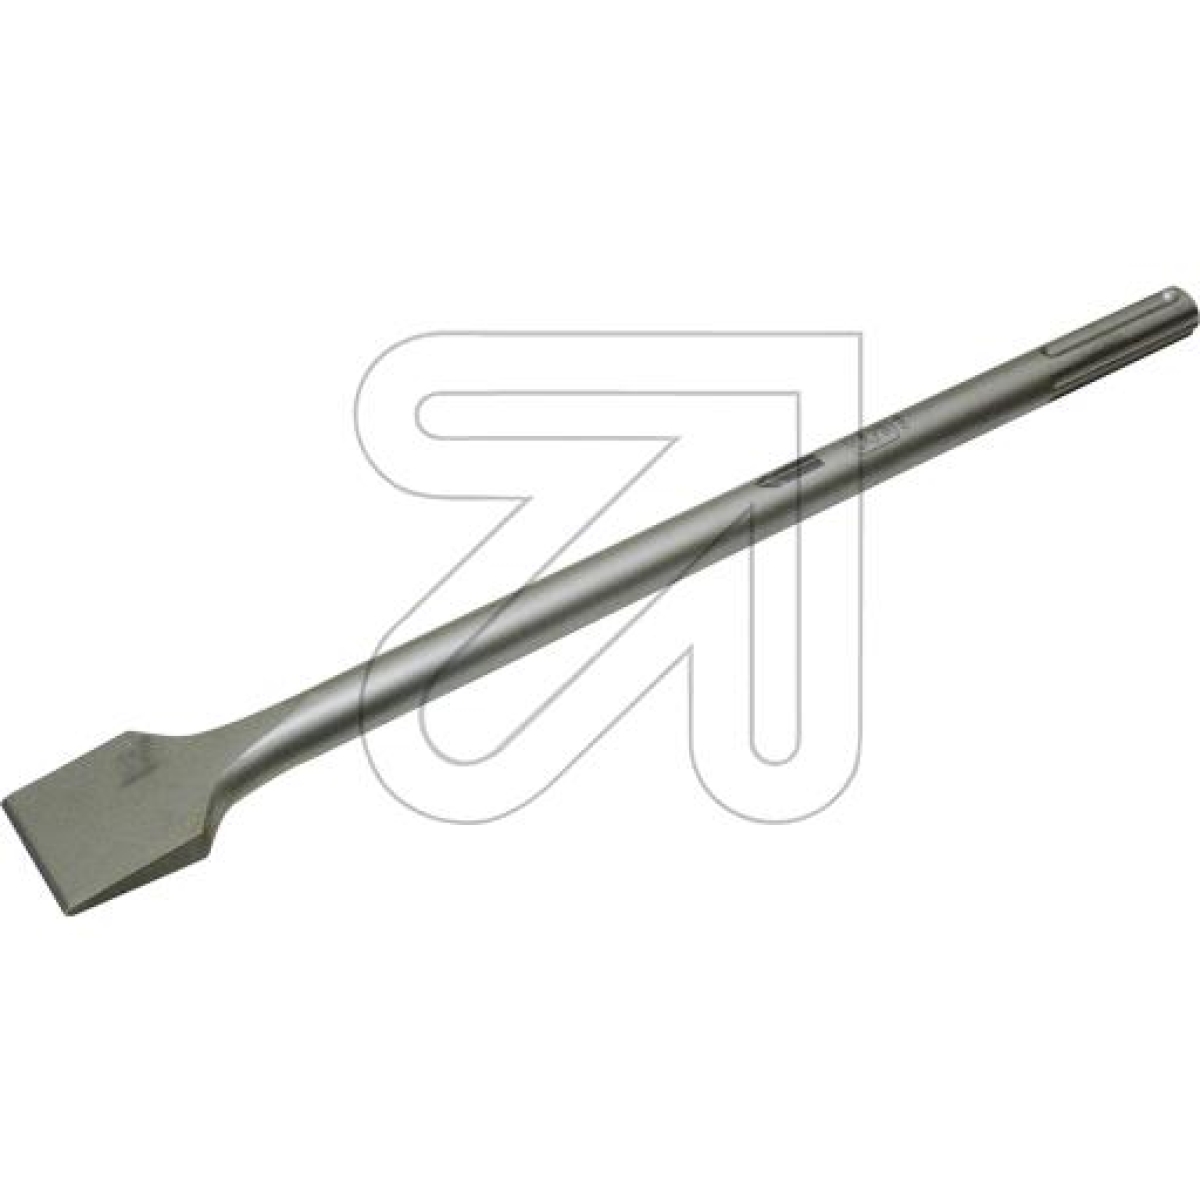 hellerSpade chisel SDS-Max 50 x 400mmArticle-No: 750595